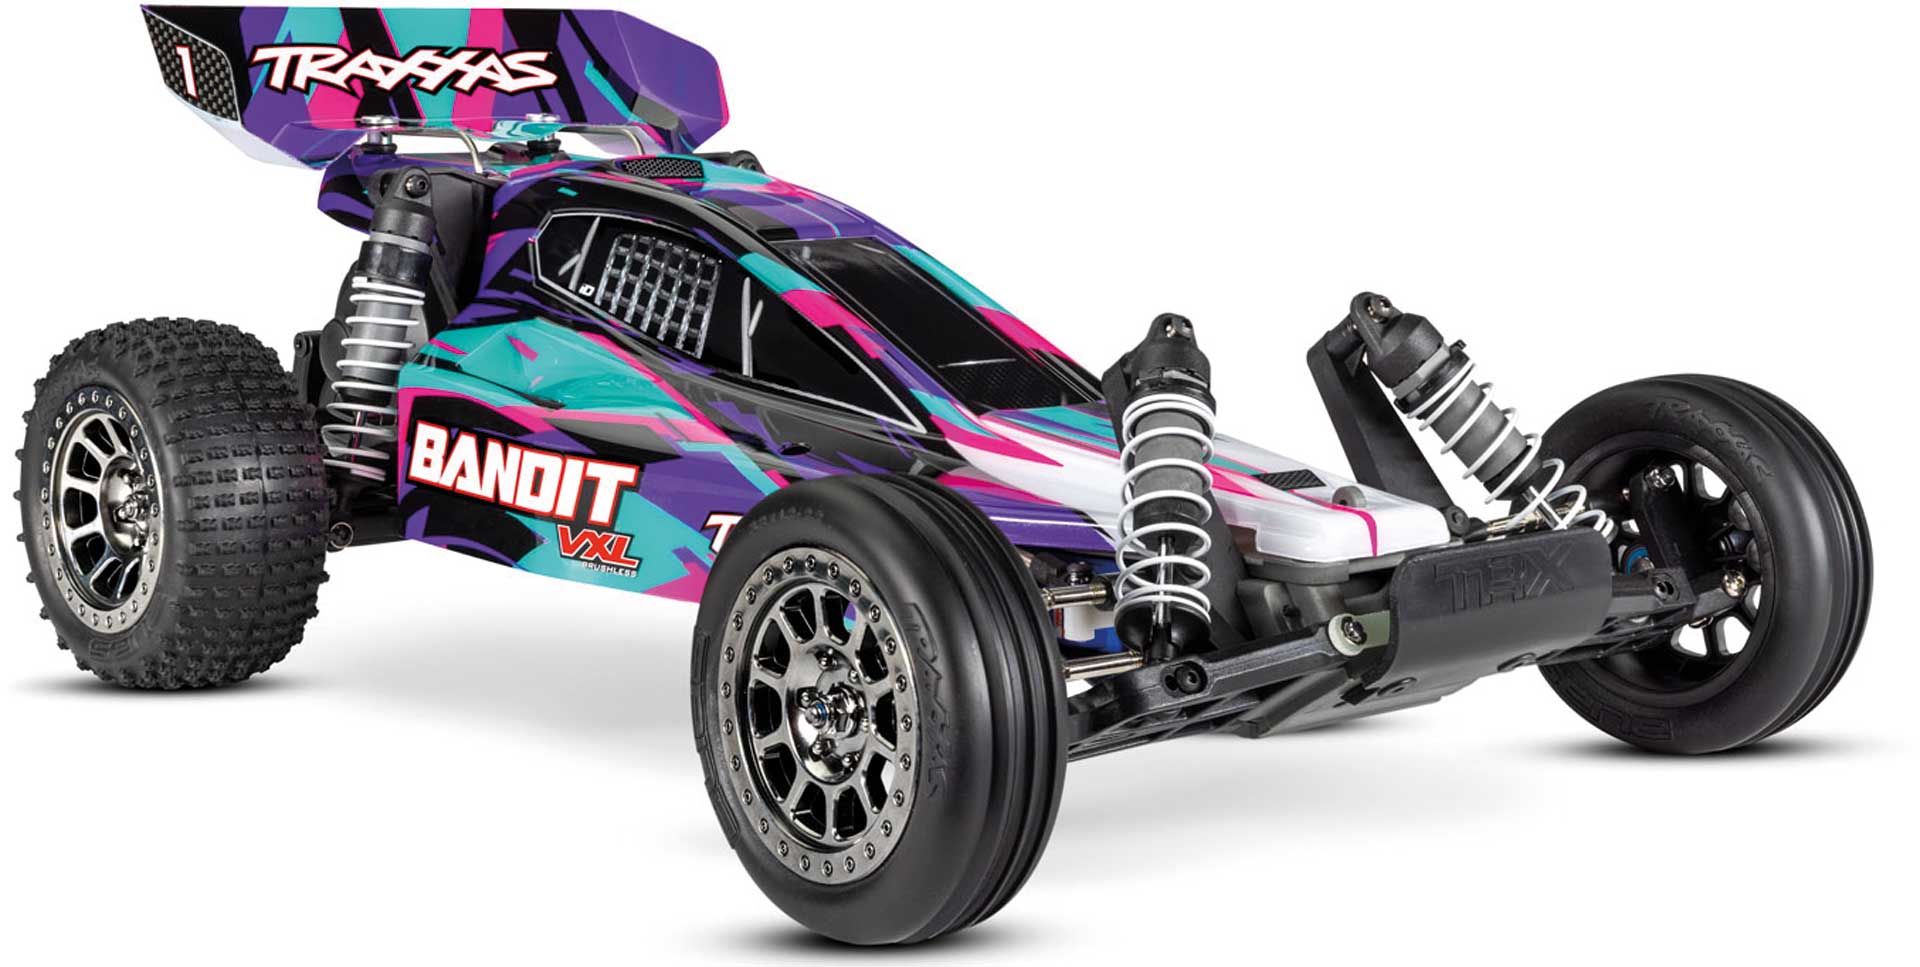 TRAXXAS BANDIT VXL PURBLE BL 2.4GHZ +TSM OHNE AKKU/LADER 1/10 2WD BUGGY BRUSHLESS